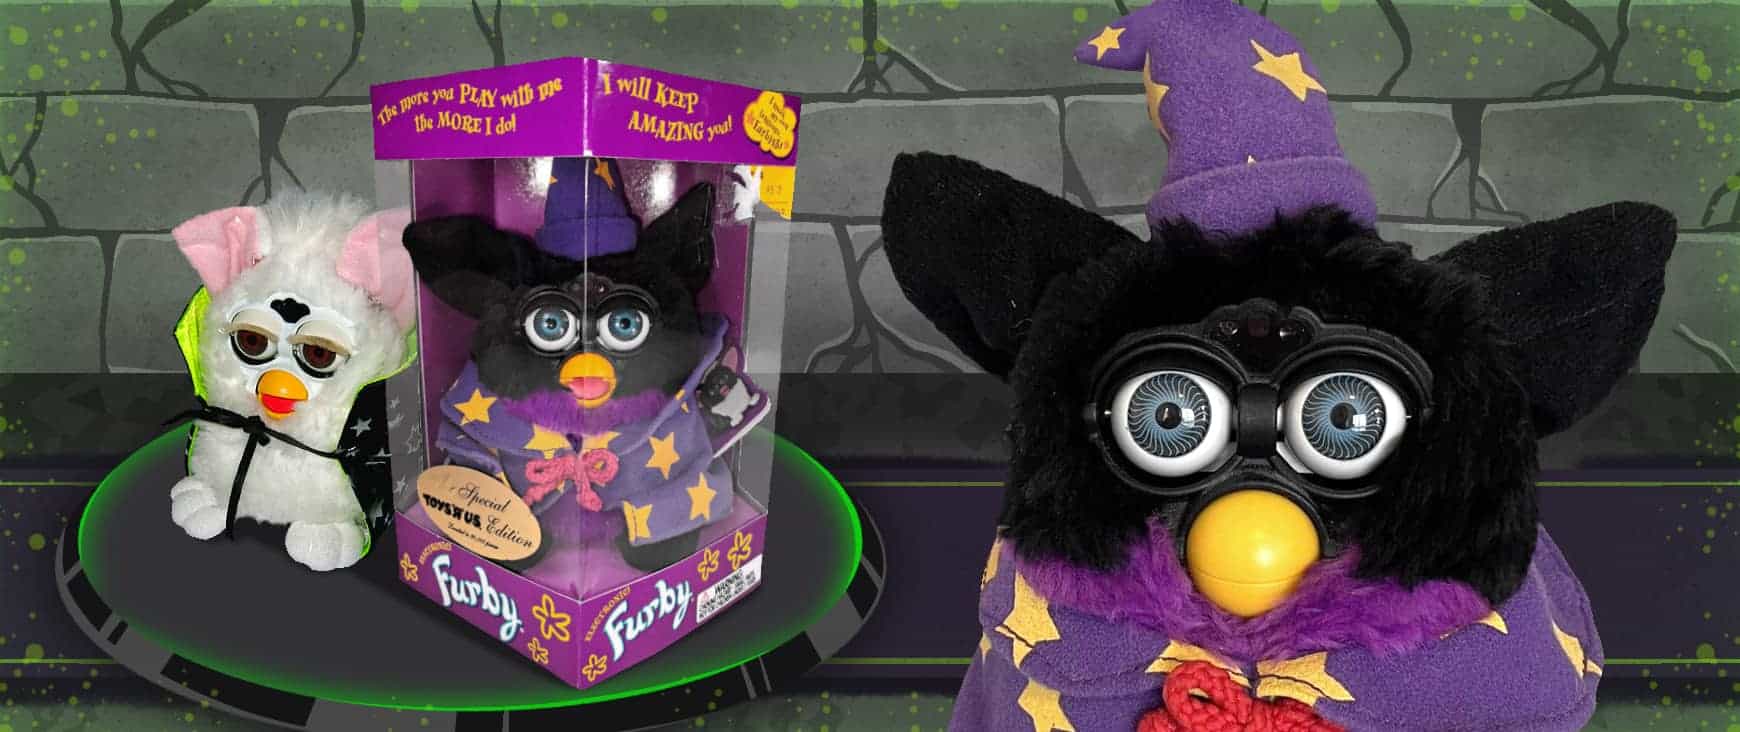 1998 Witches Cat Electronic Furby By Tiger Electronic [Sealed